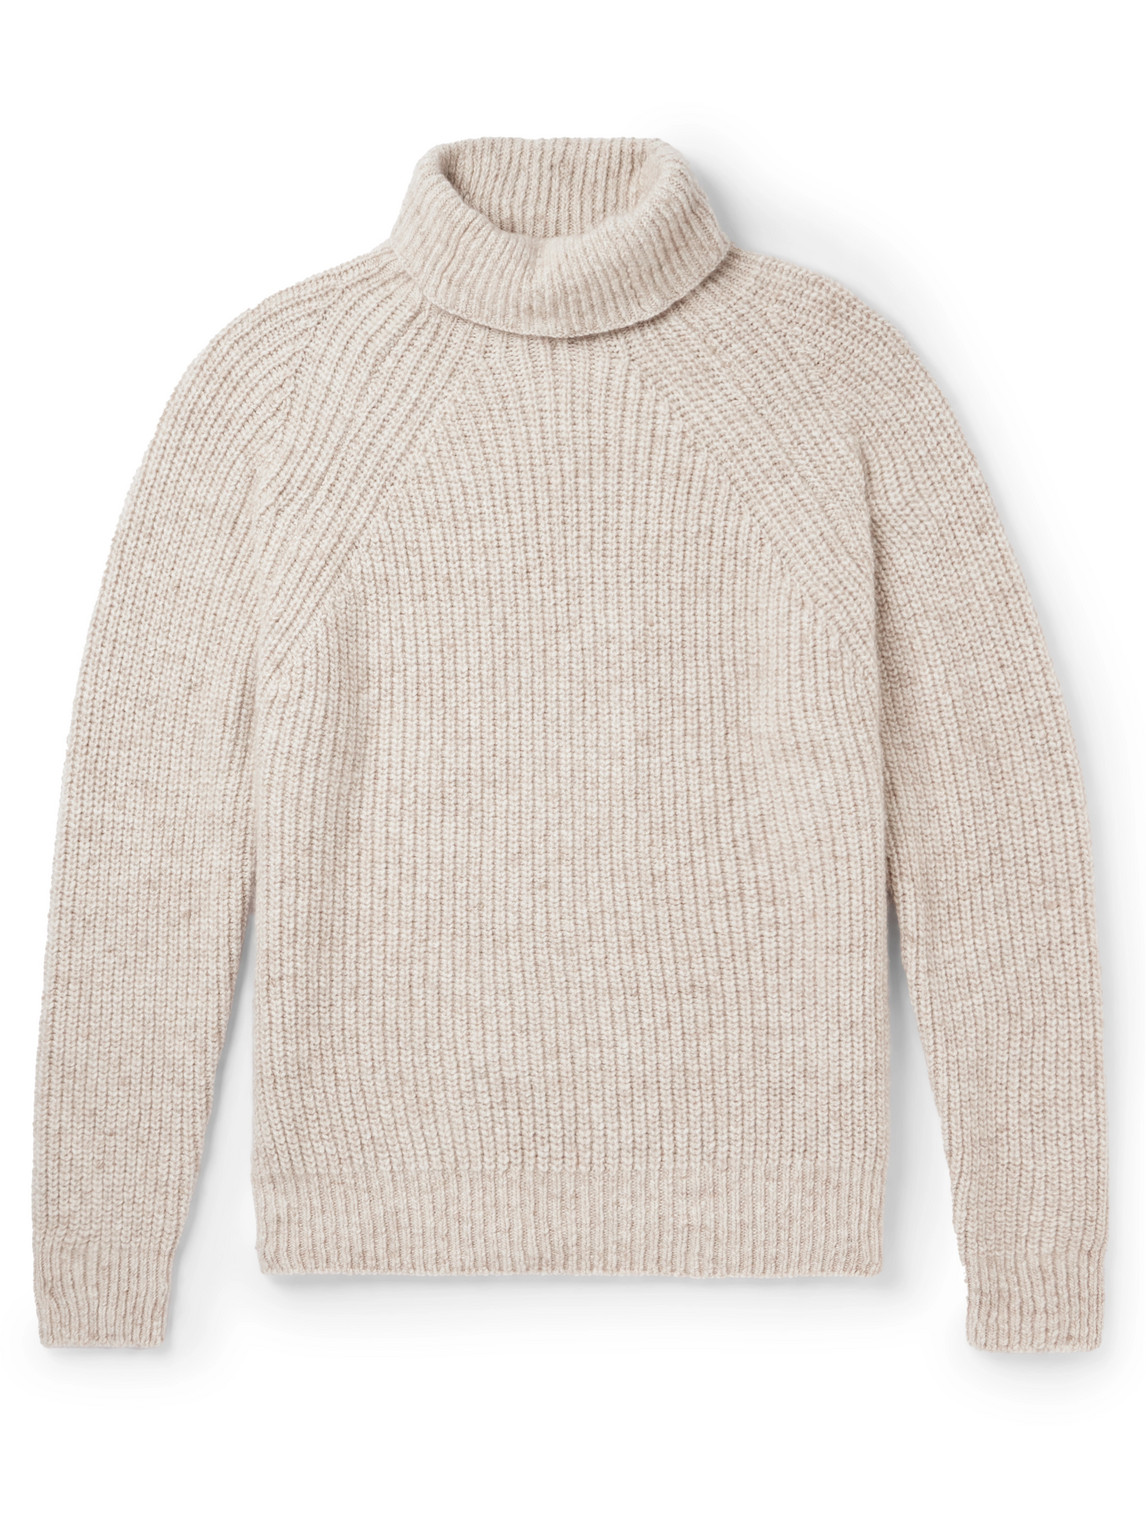 Inis Meain Boatbuilder Ribbed Cashmere Rollneck Jumper In Neutrals